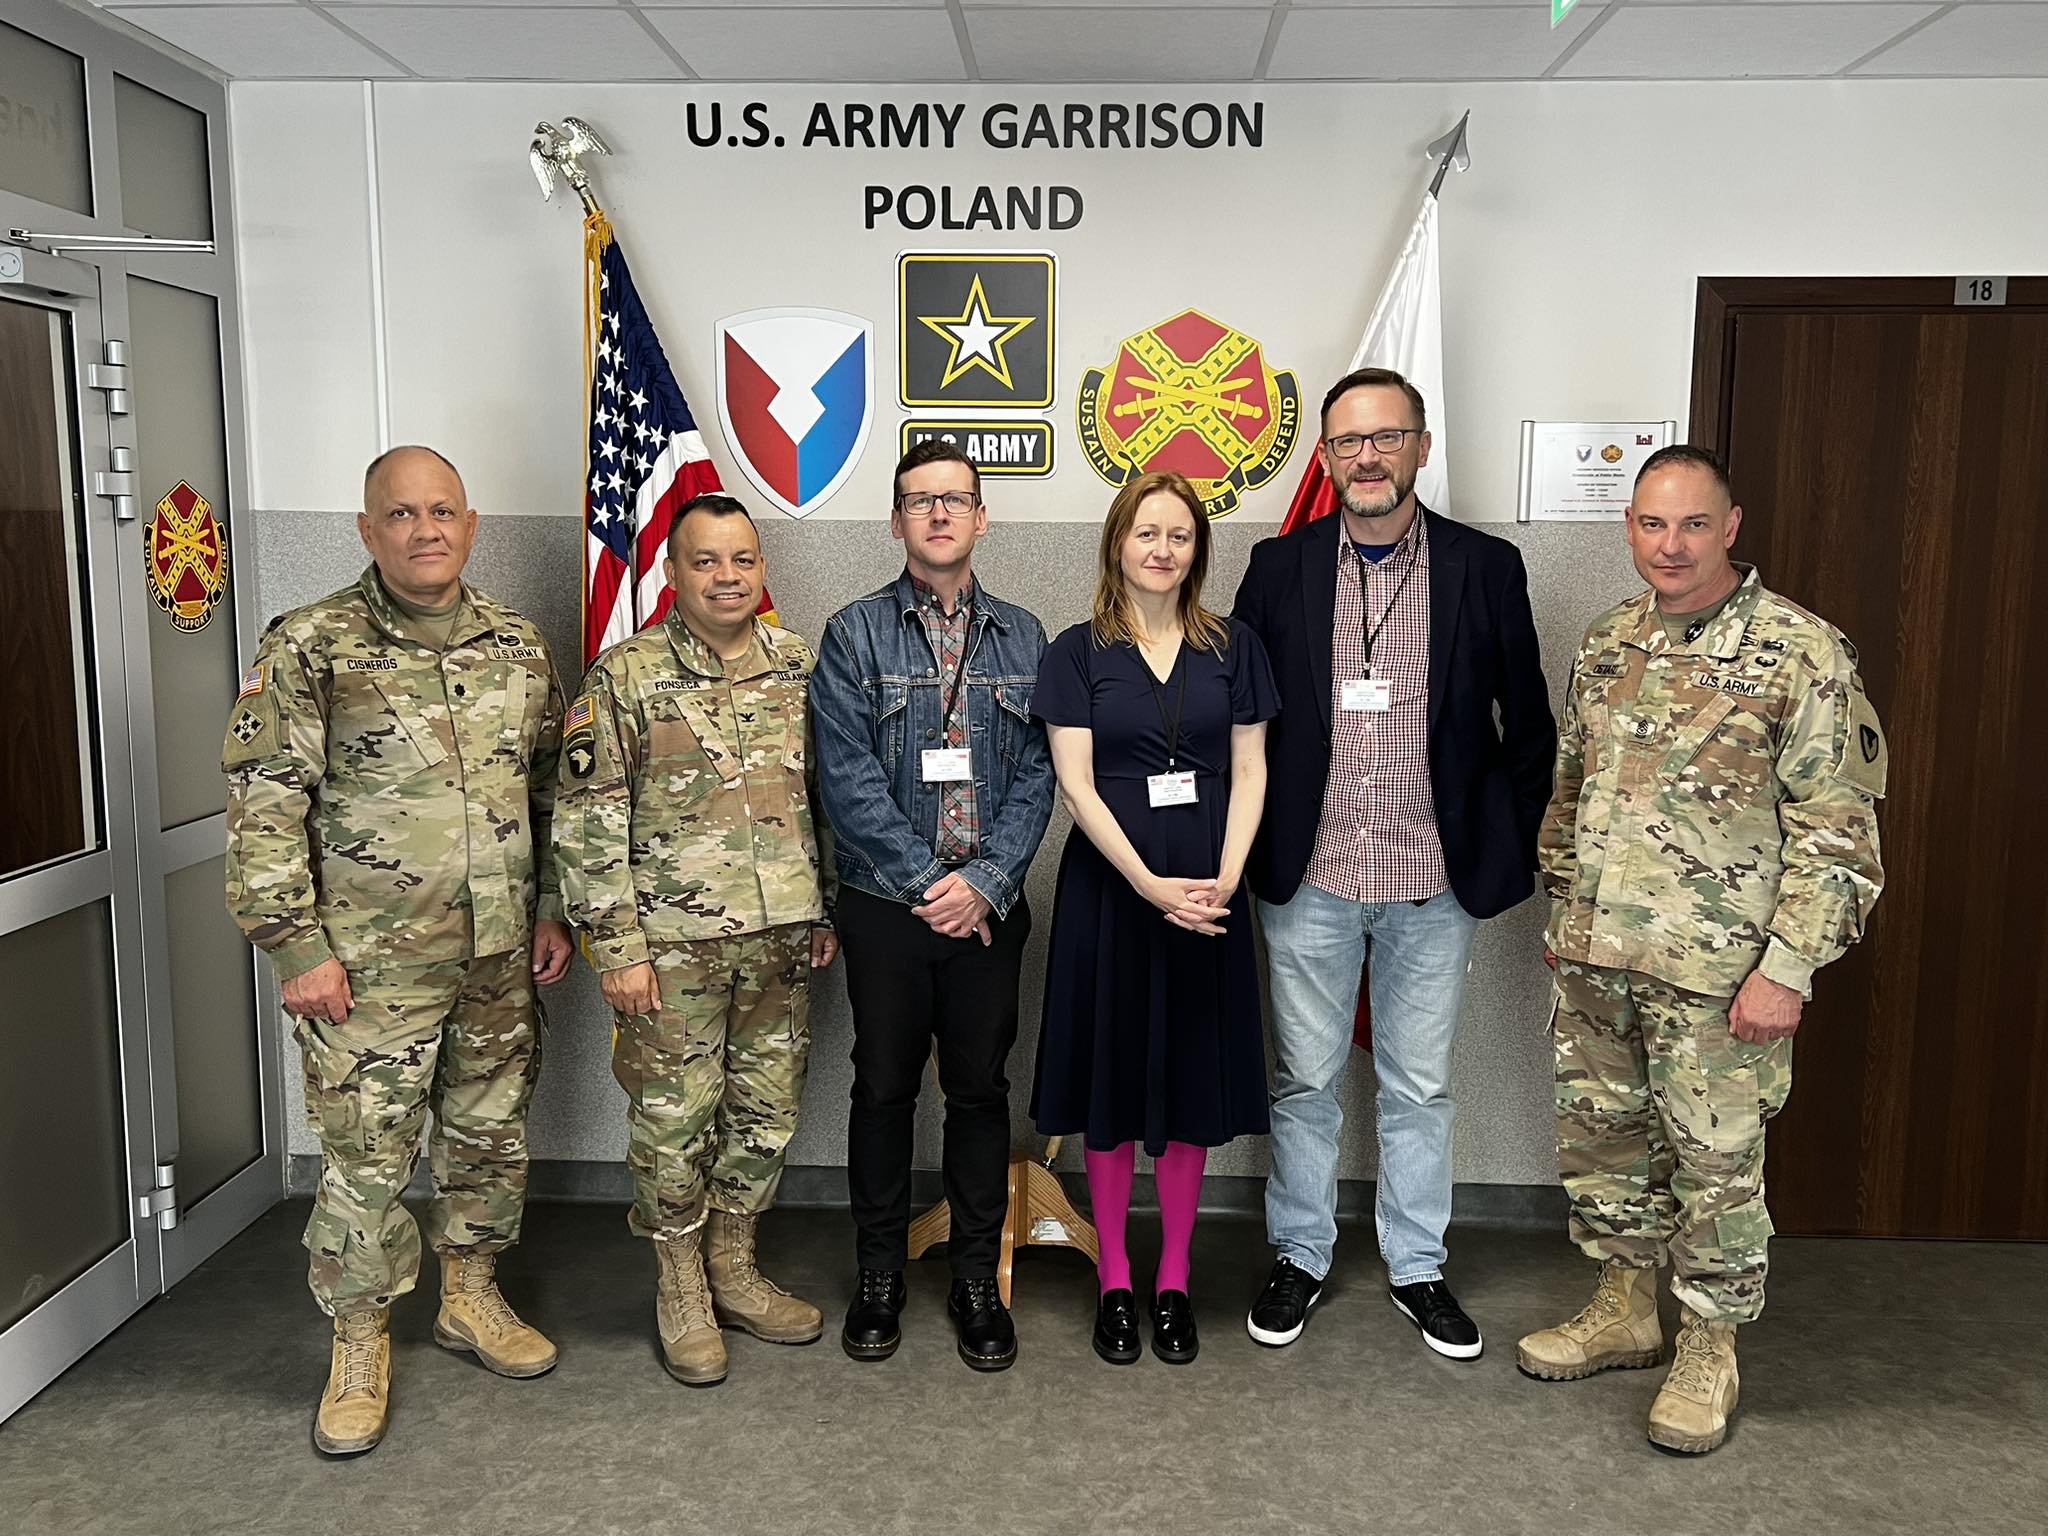 Faculty of English representatives with US Army officers. A text on the wall says U.S. Army Garrison Poland